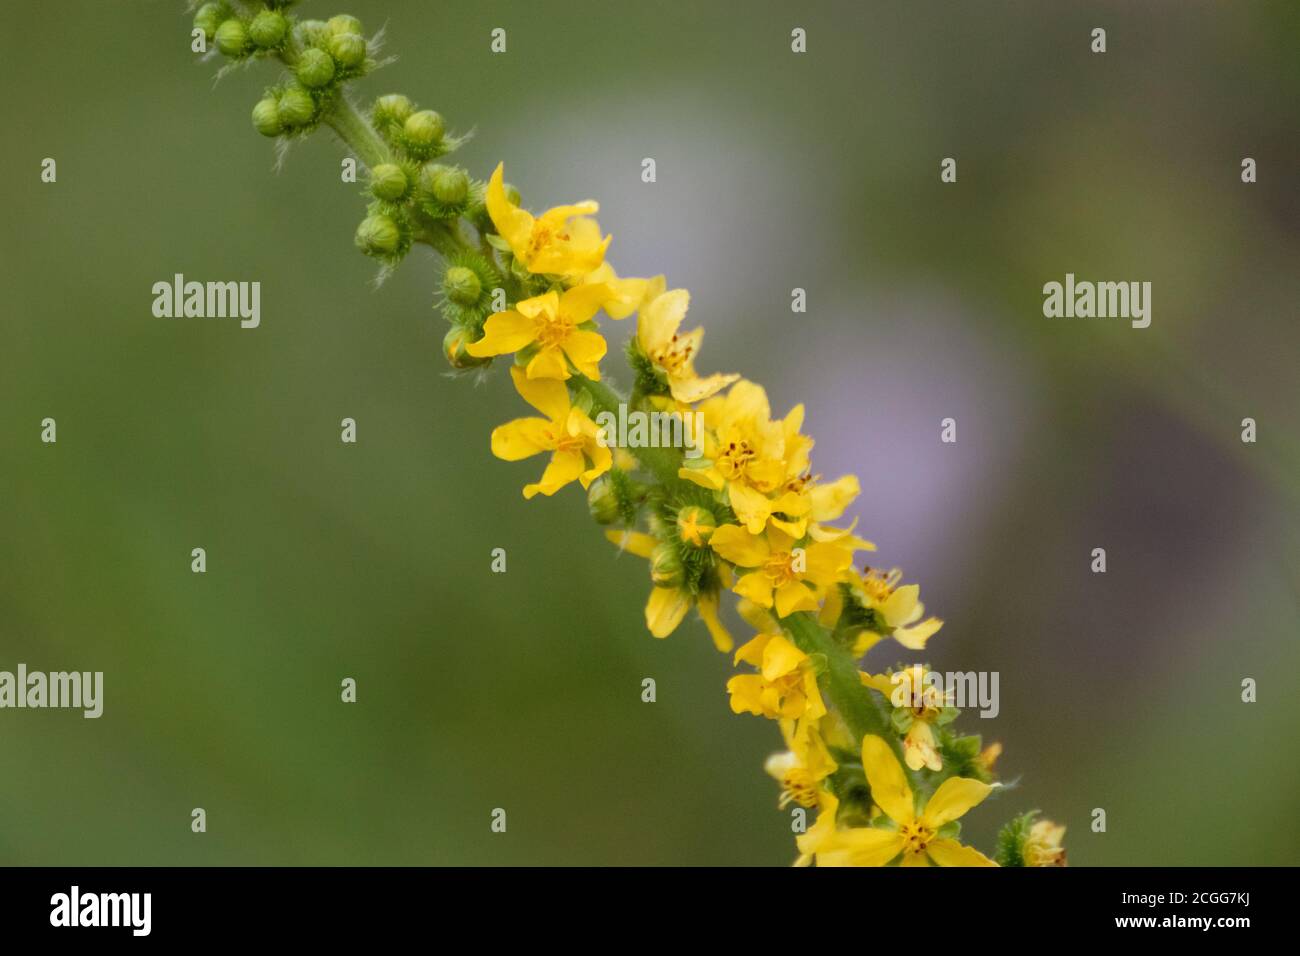 Agrimony yellow tall stem medicinal herb flowers macro. Wild summer grass close-up on blurred green lawn natural background Stock Photo